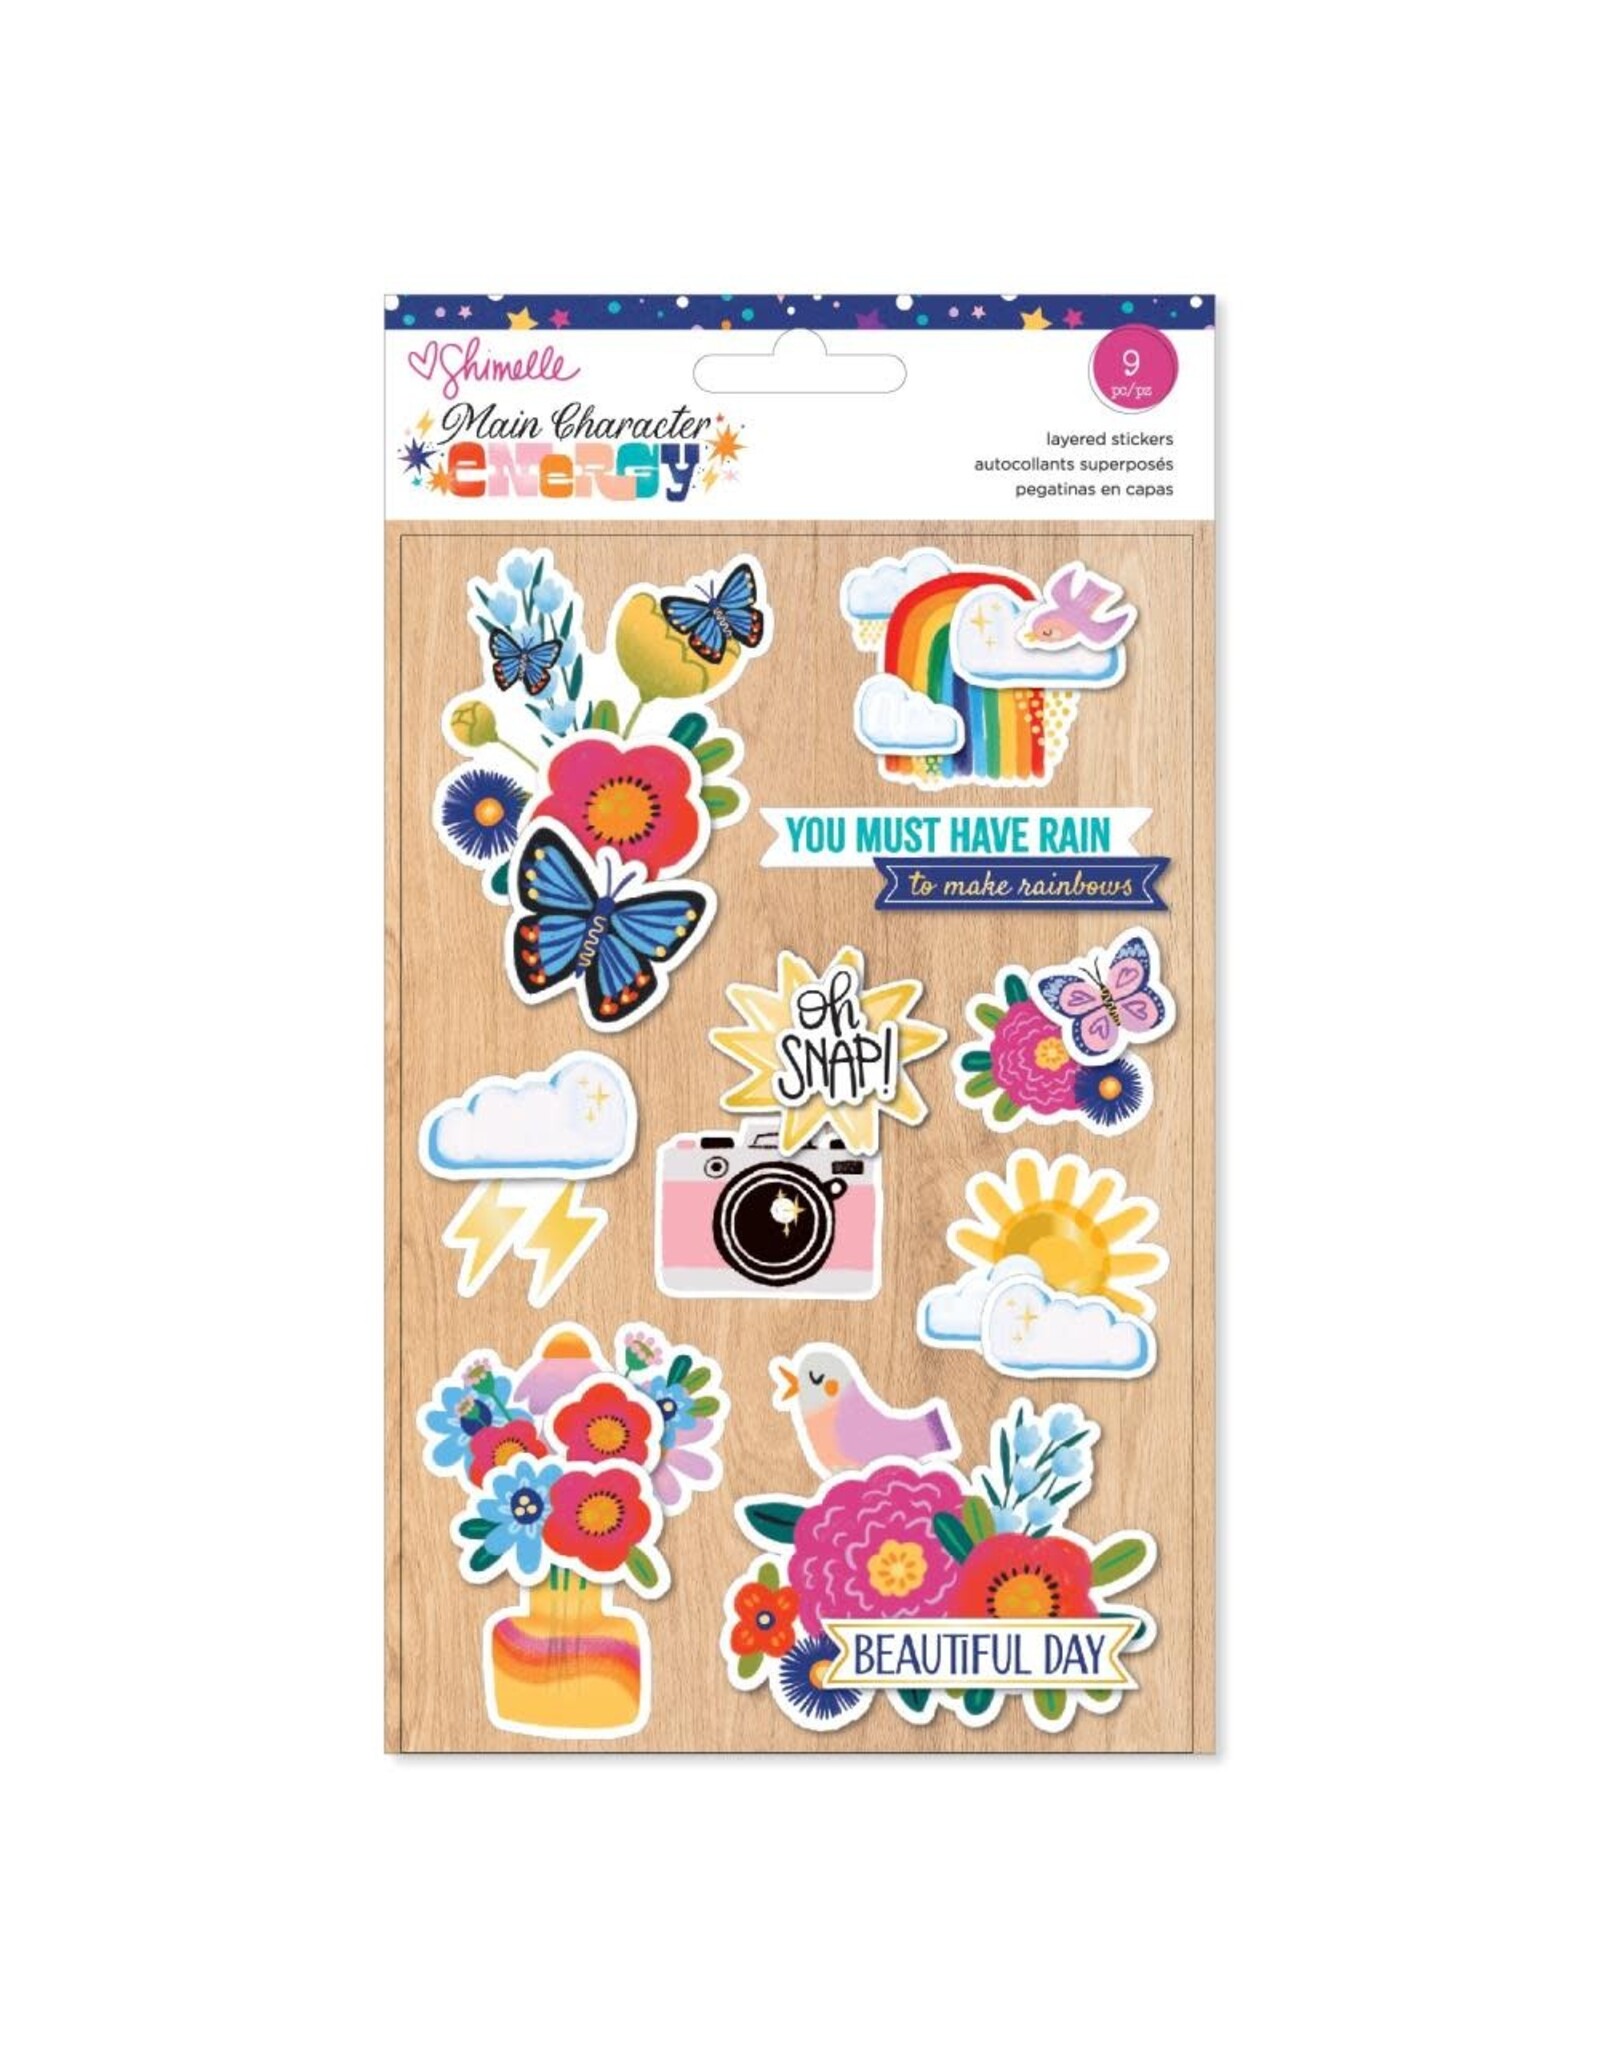 AMERICAN CRAFTS SHIMELLE MAIN CHARACTER LAYERED STICKERS